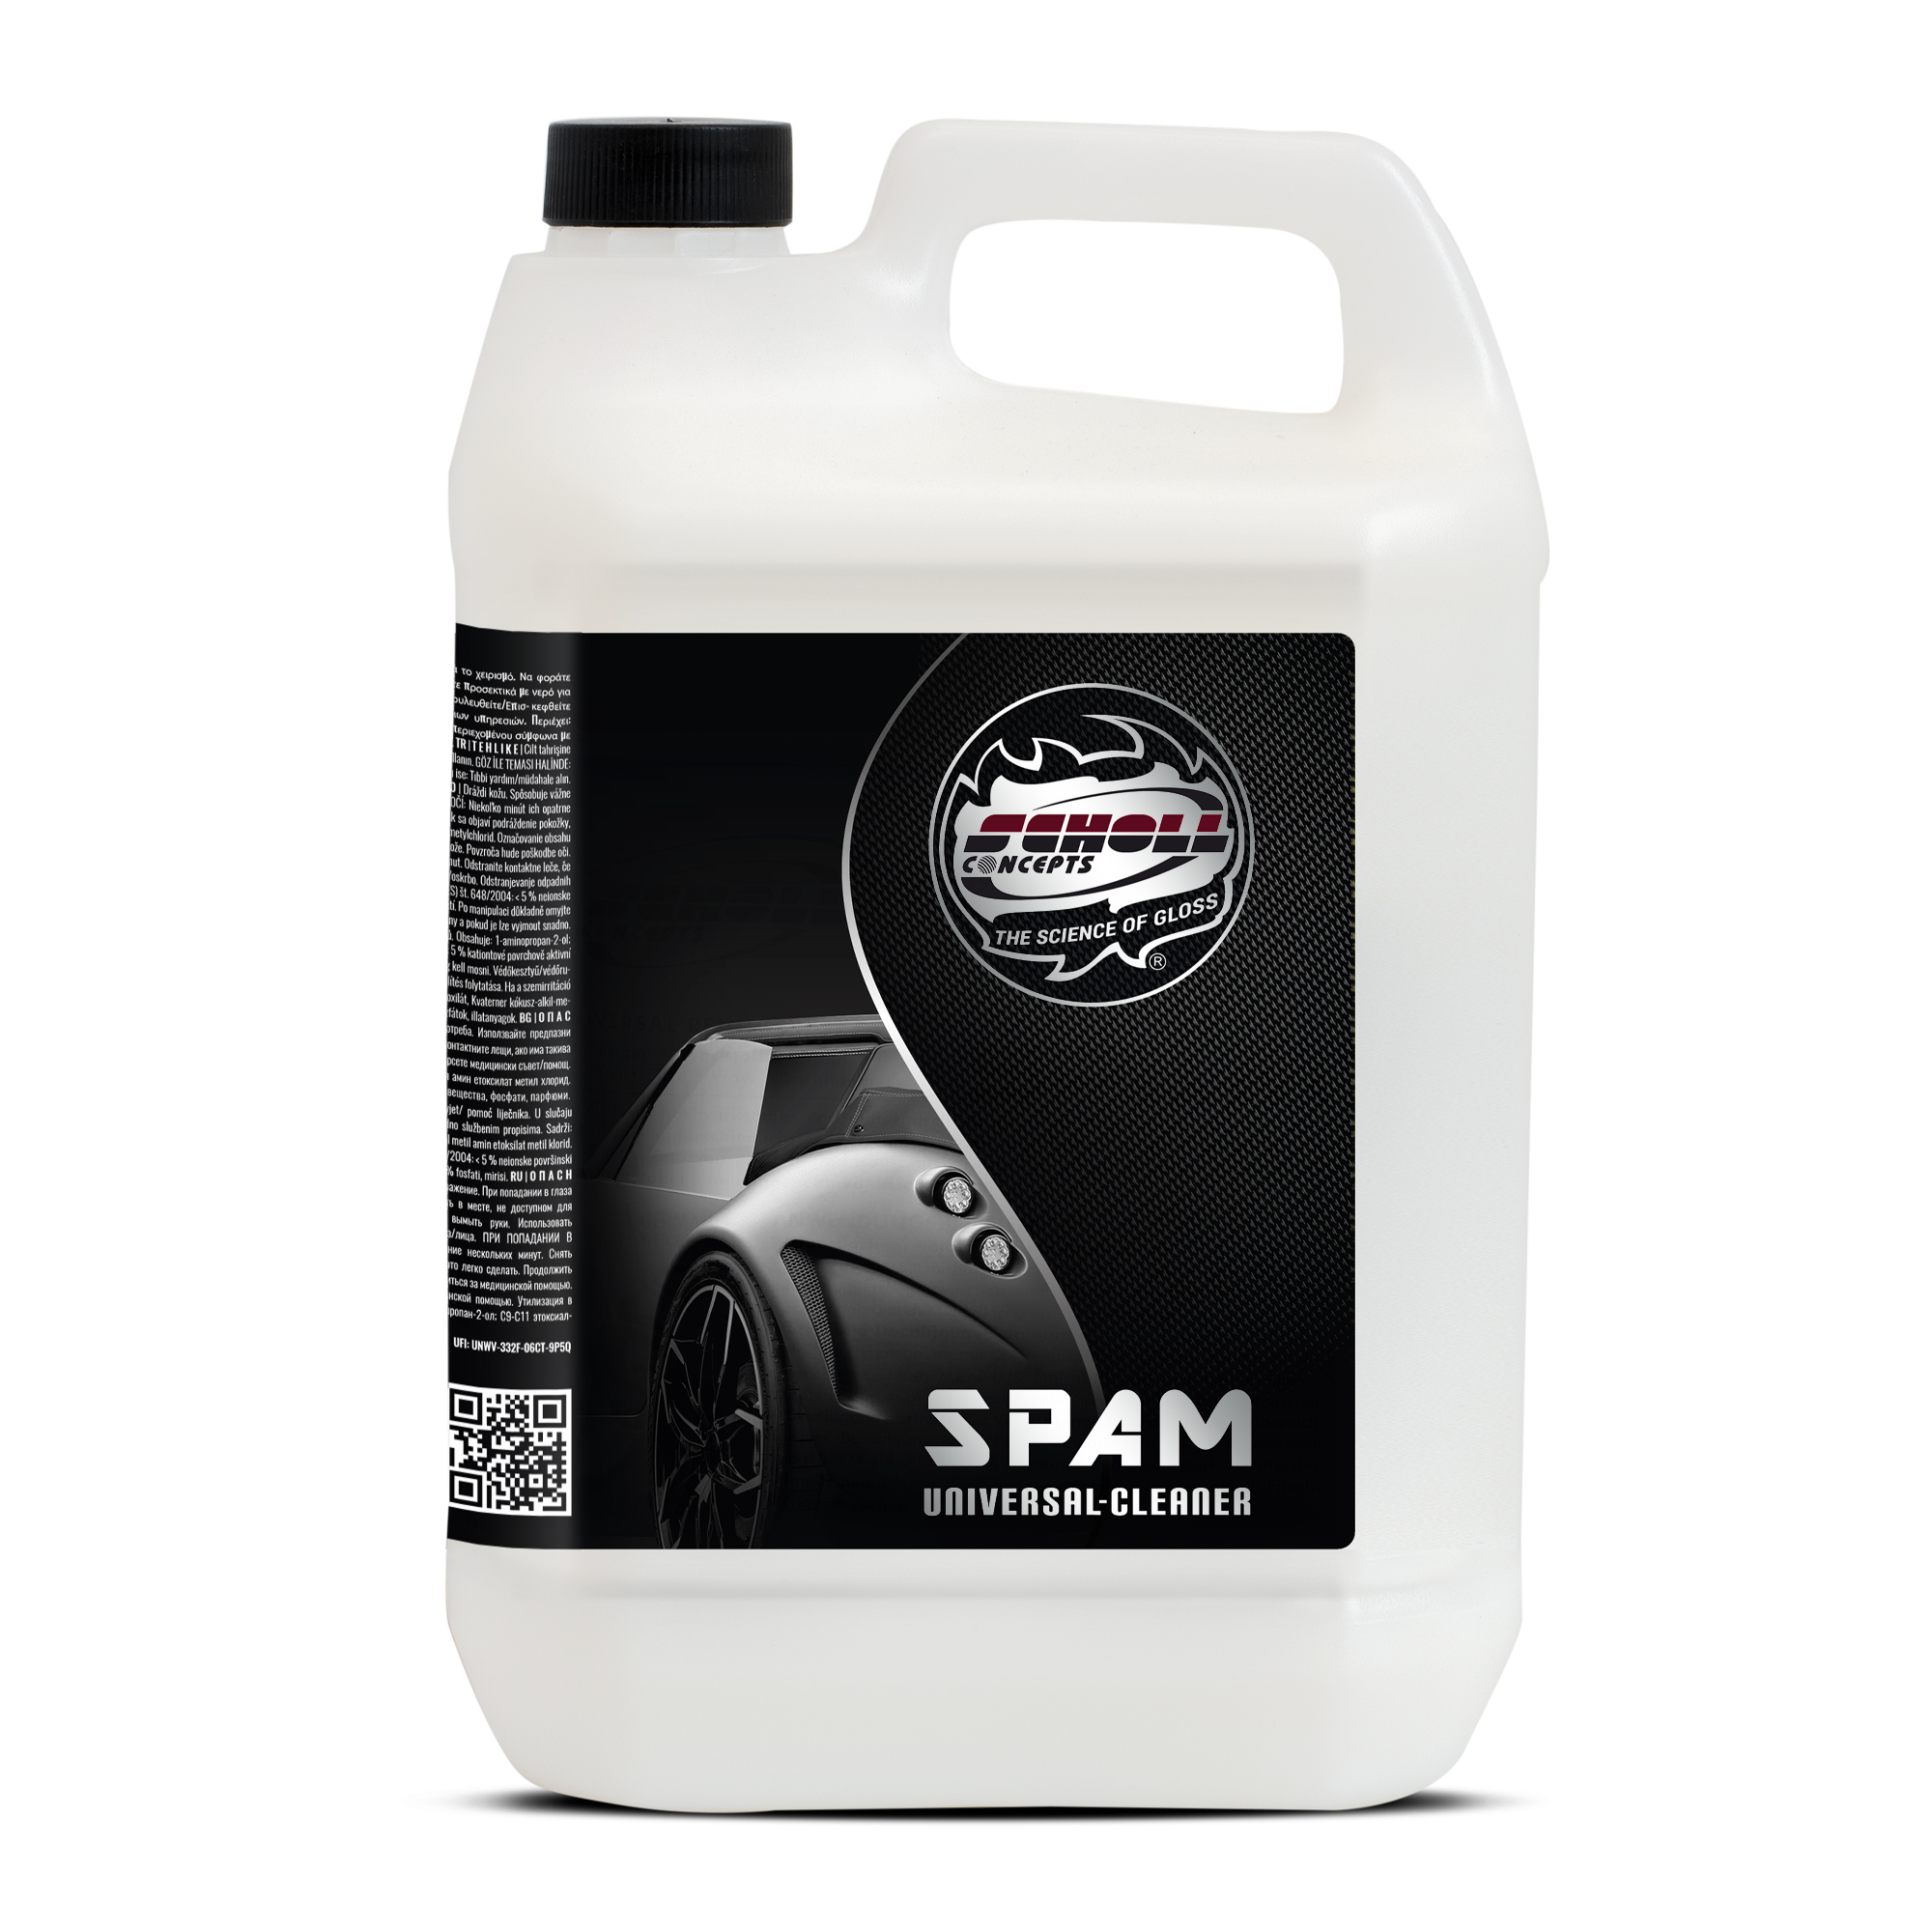 SPAM (Apple Edition) Universal Cleaner 5 Ltr. 